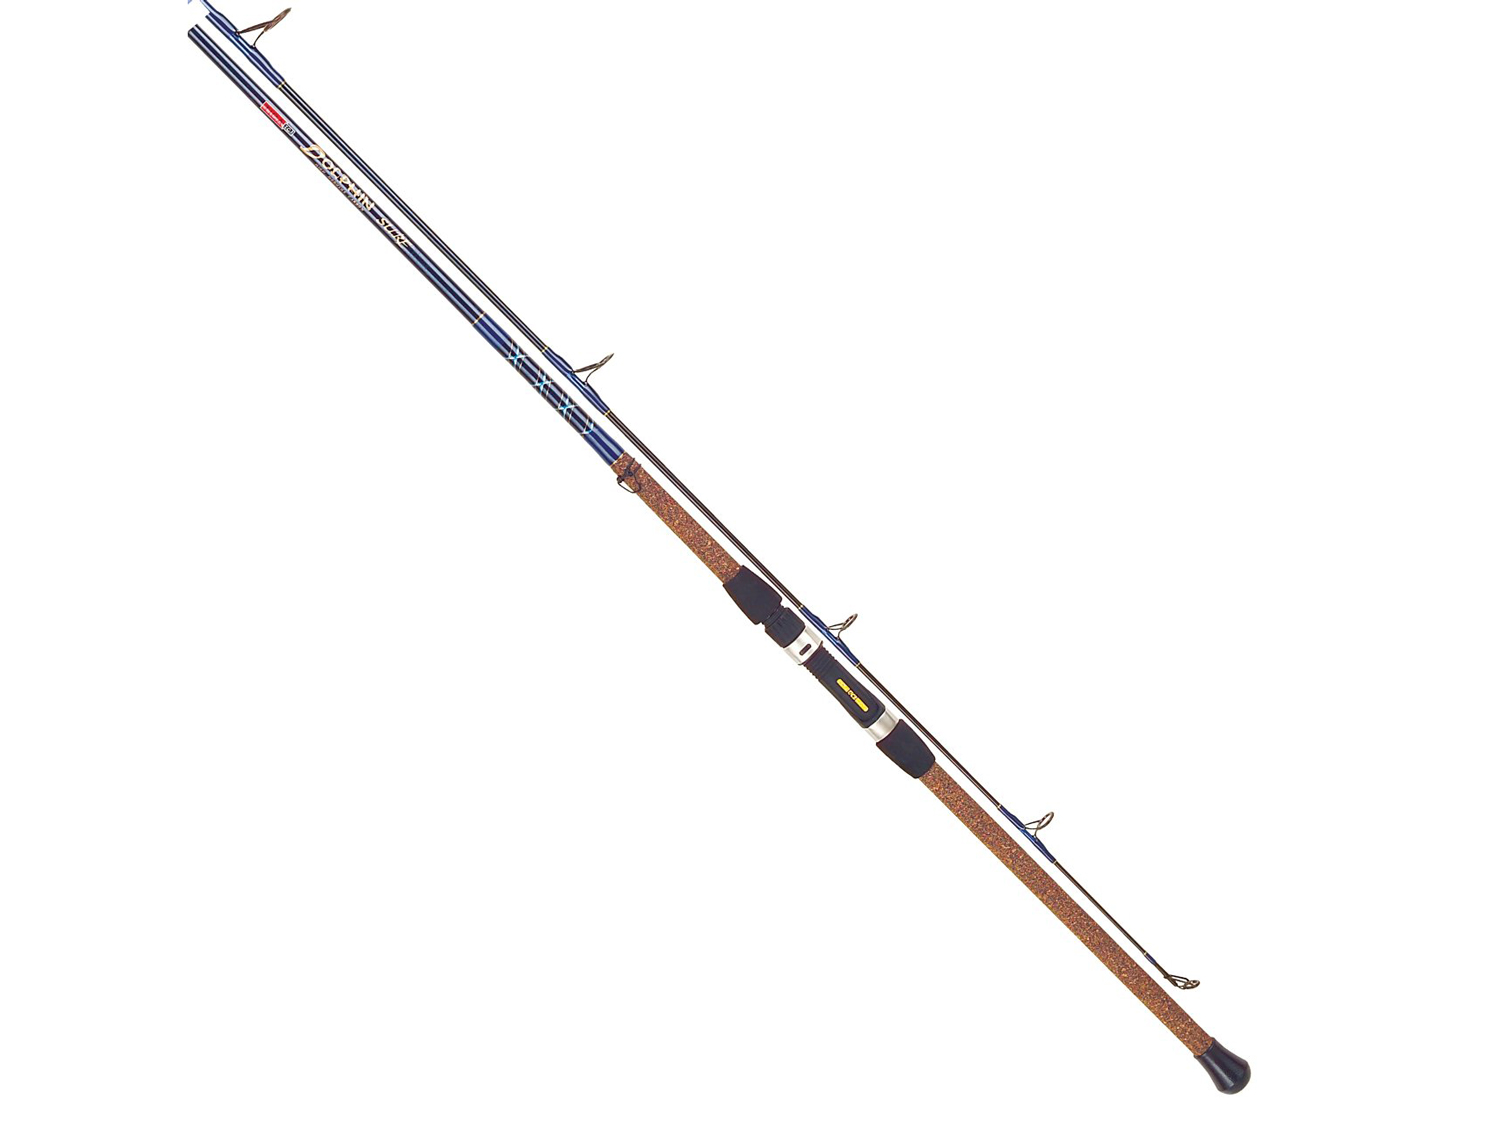 How to Choose a Spinning Rod for Surf Fishing